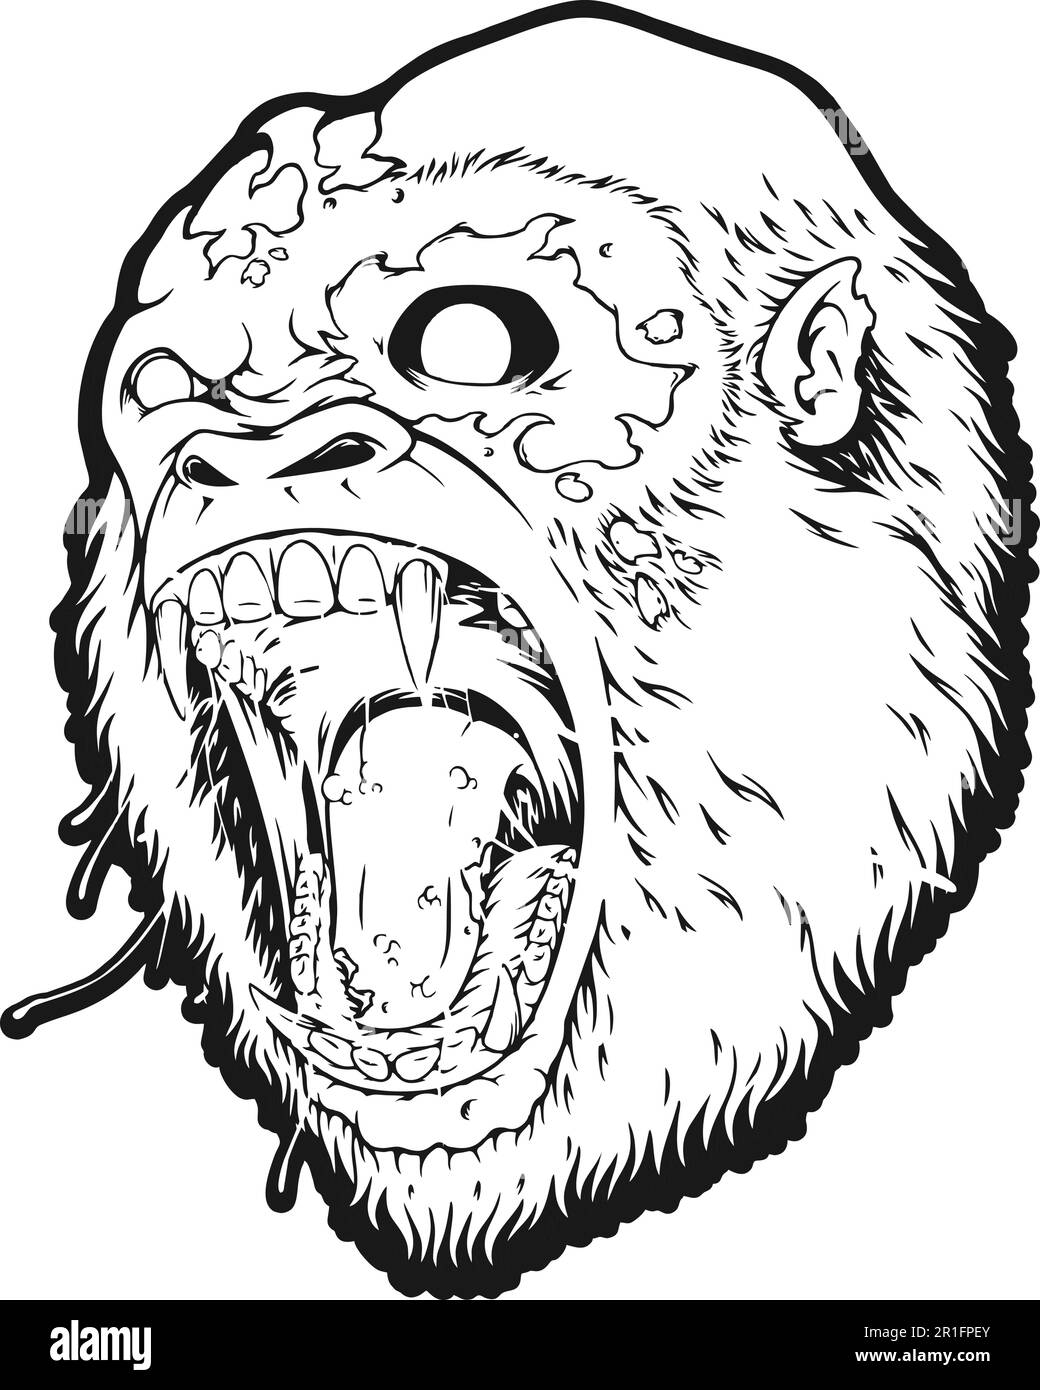 Spooky angry roar monster zombie gorilla logo illustrations monochrome vector illustrations for your work logo, merchandise t-shirt, stickers and labe Stock Vector